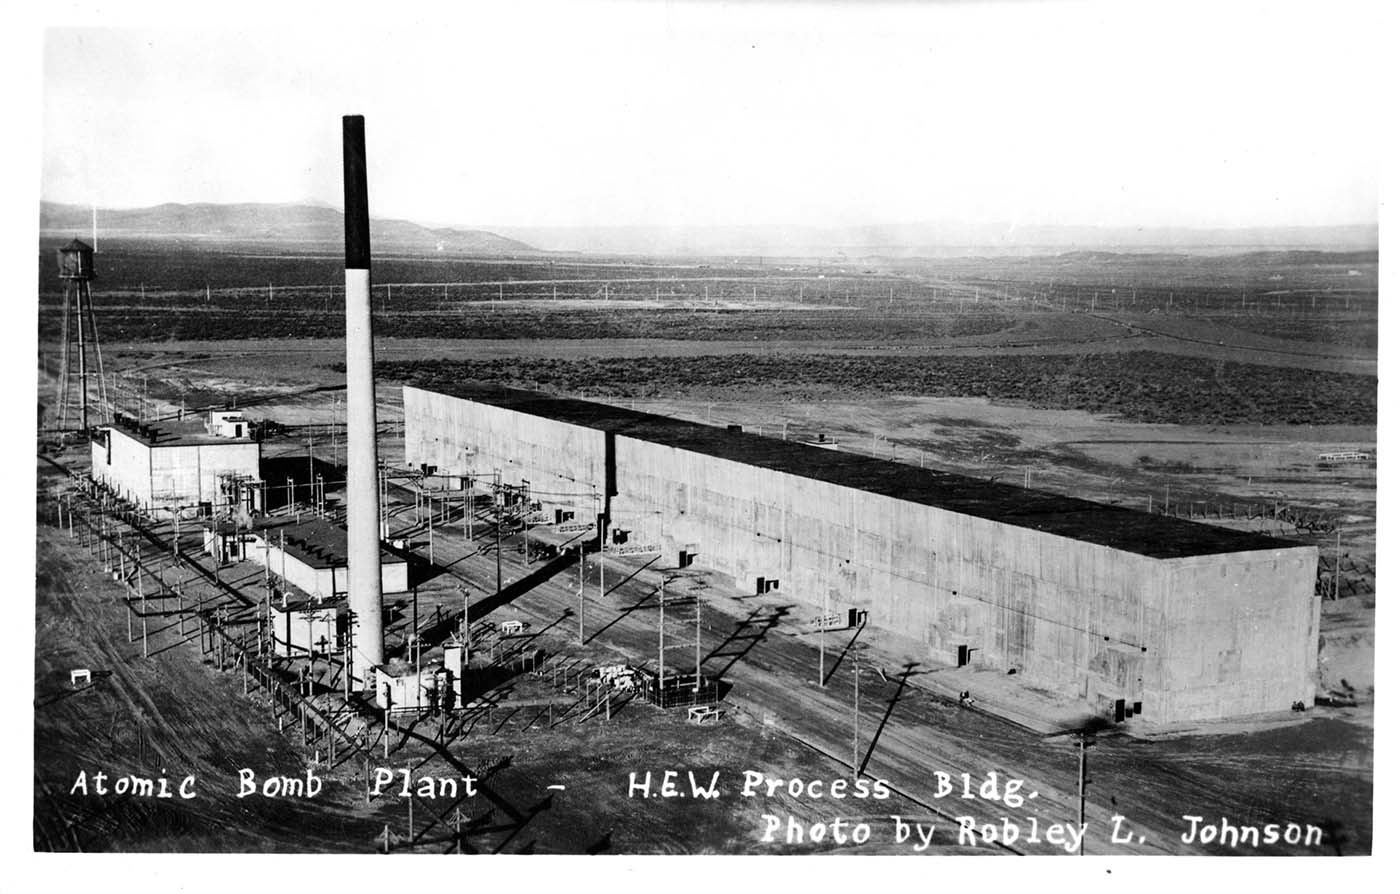 Chemical Separation Plant (Queen Mary) at Hanford.